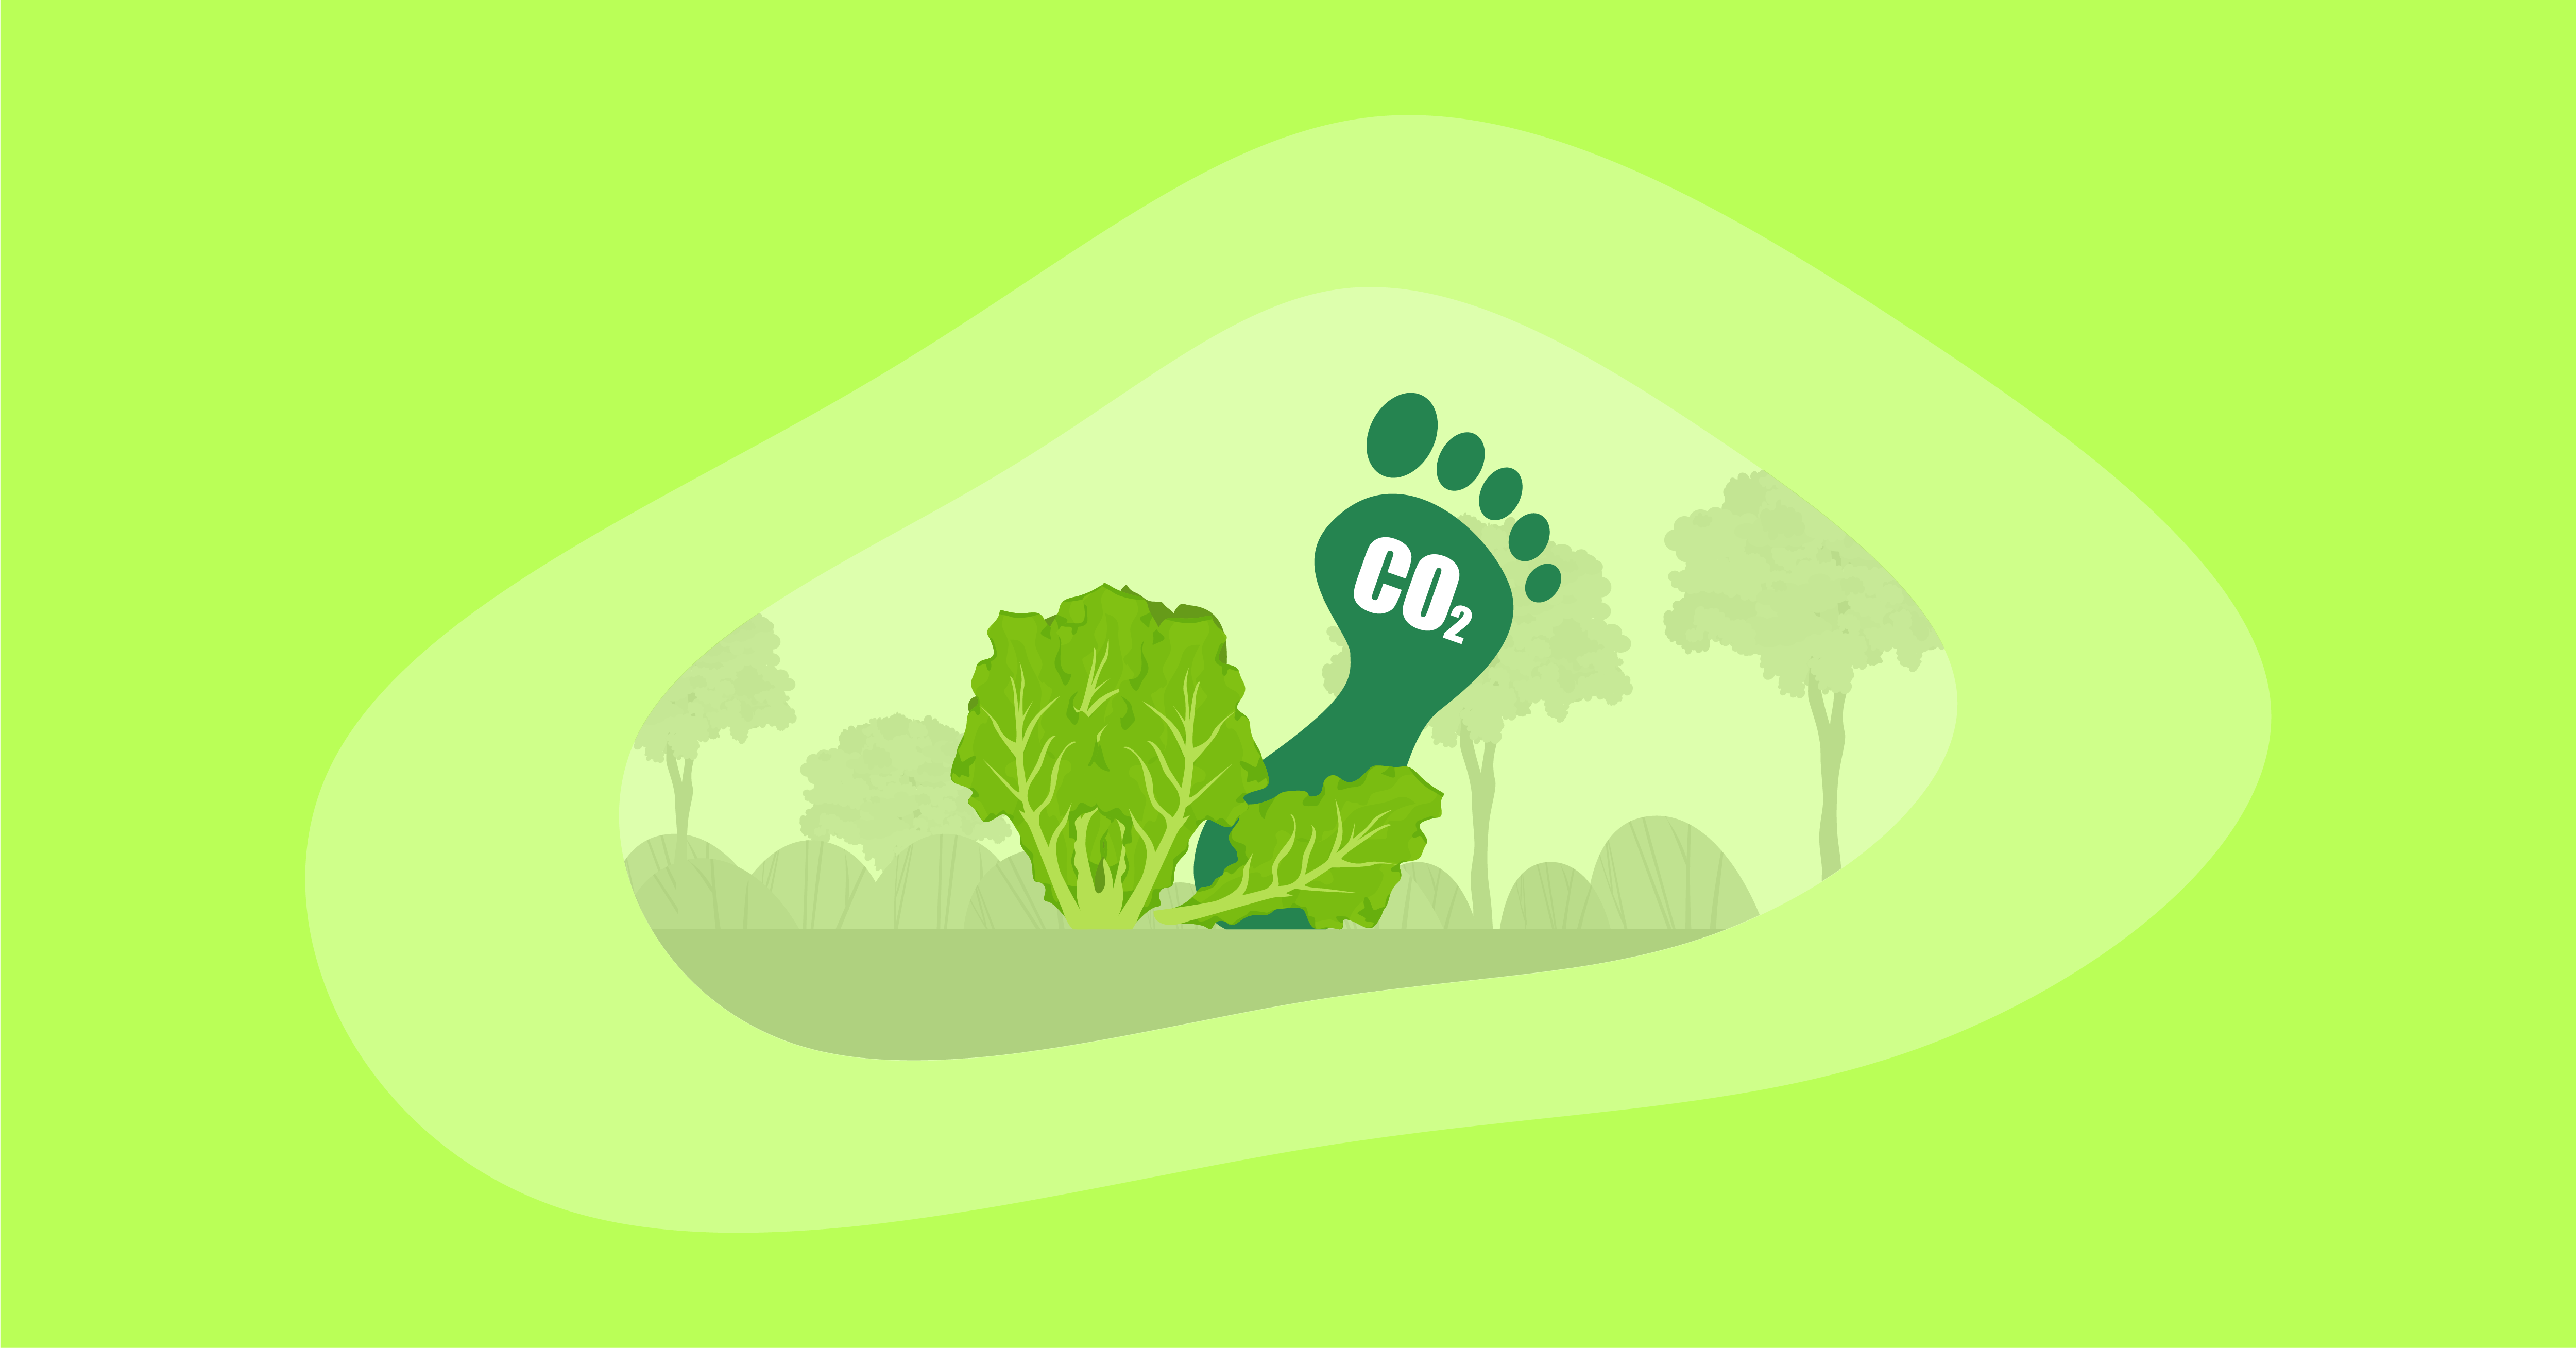 Attempted illustration of lettuce with its carbon footprint